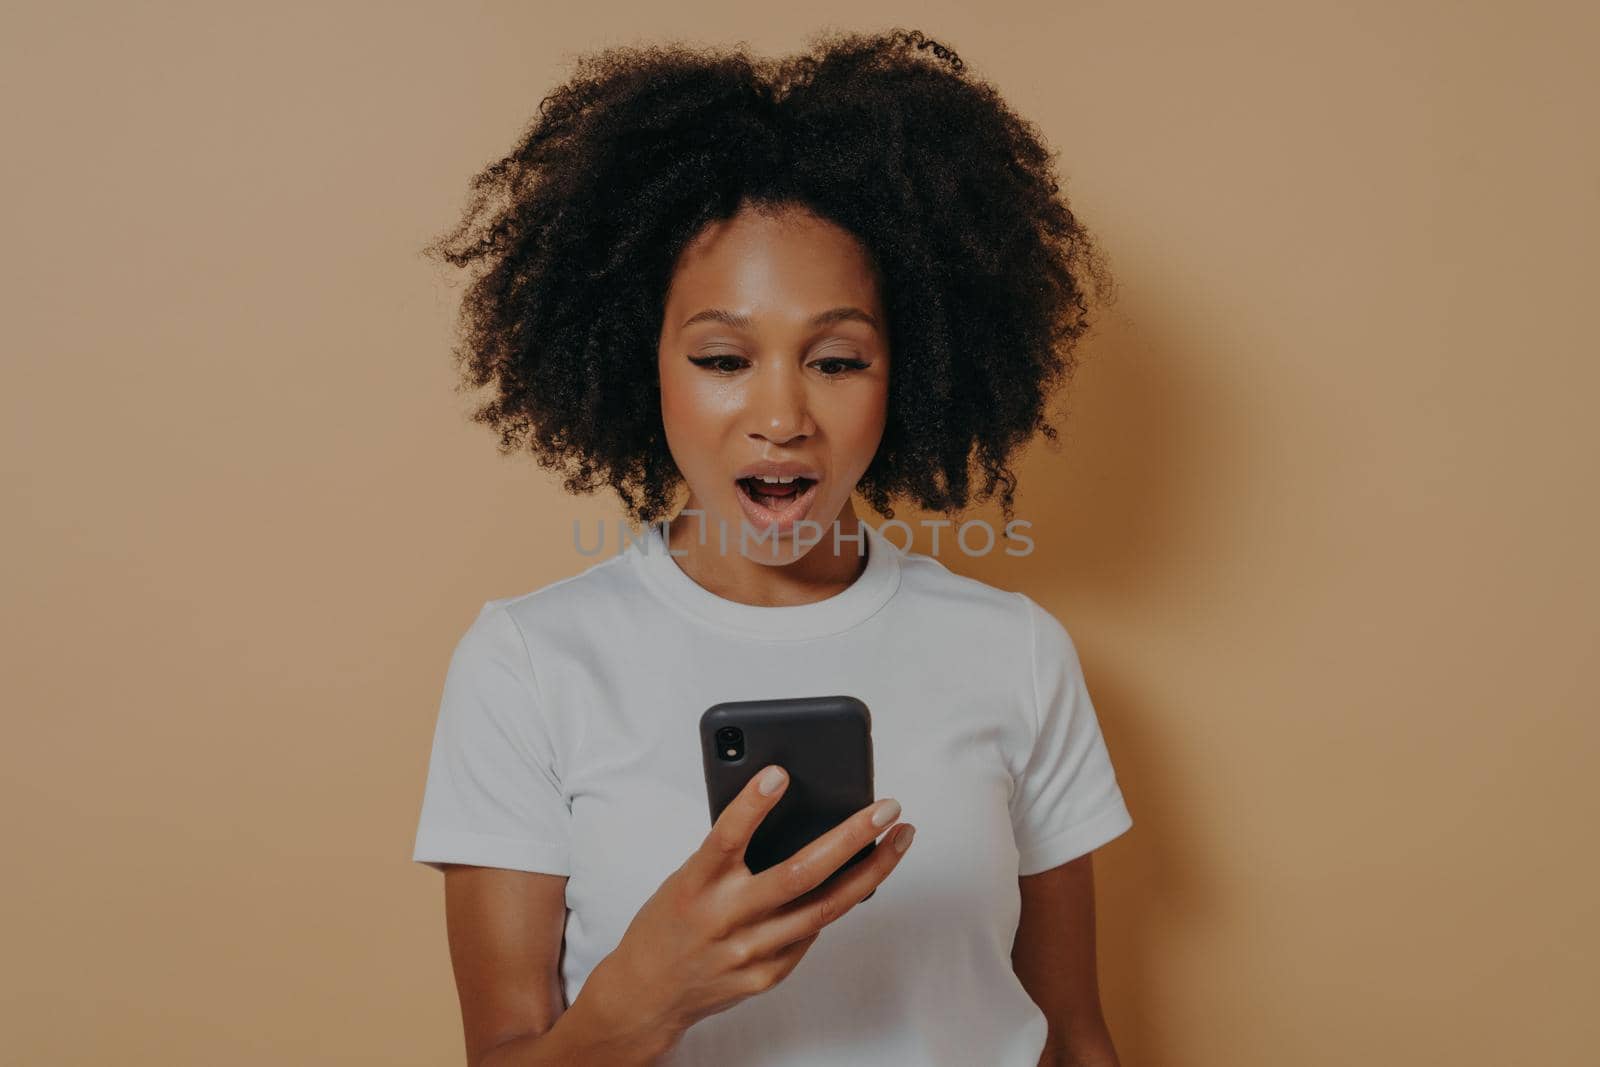 Surprised young african female looking at smartphone with shocked face expression, reading unexpected news in internet or chatting with friend, dressed in white tshirt, isolated over beige background